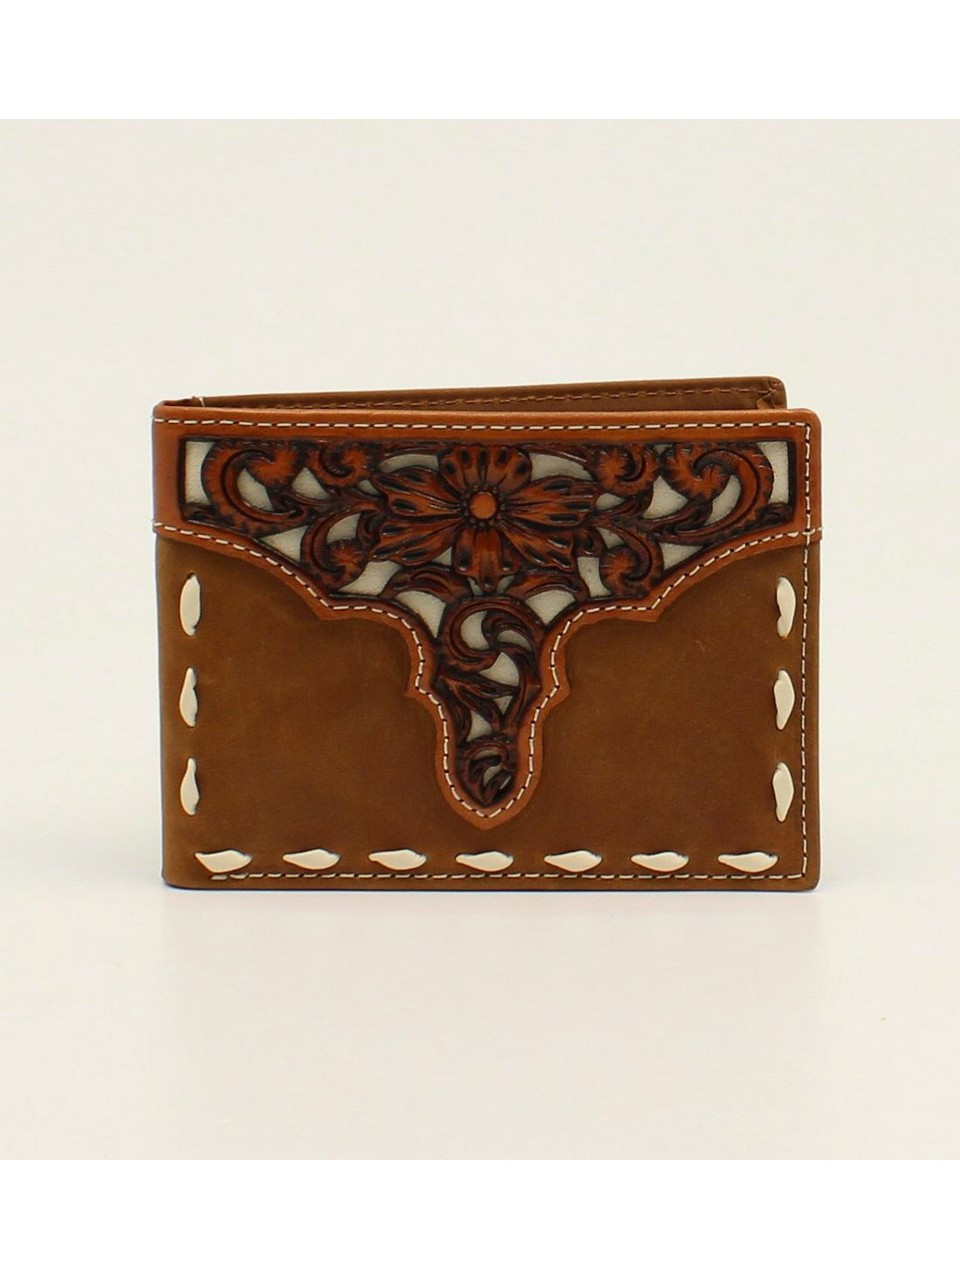 Ariat Men's Boot Stitched Rodeo Wallet